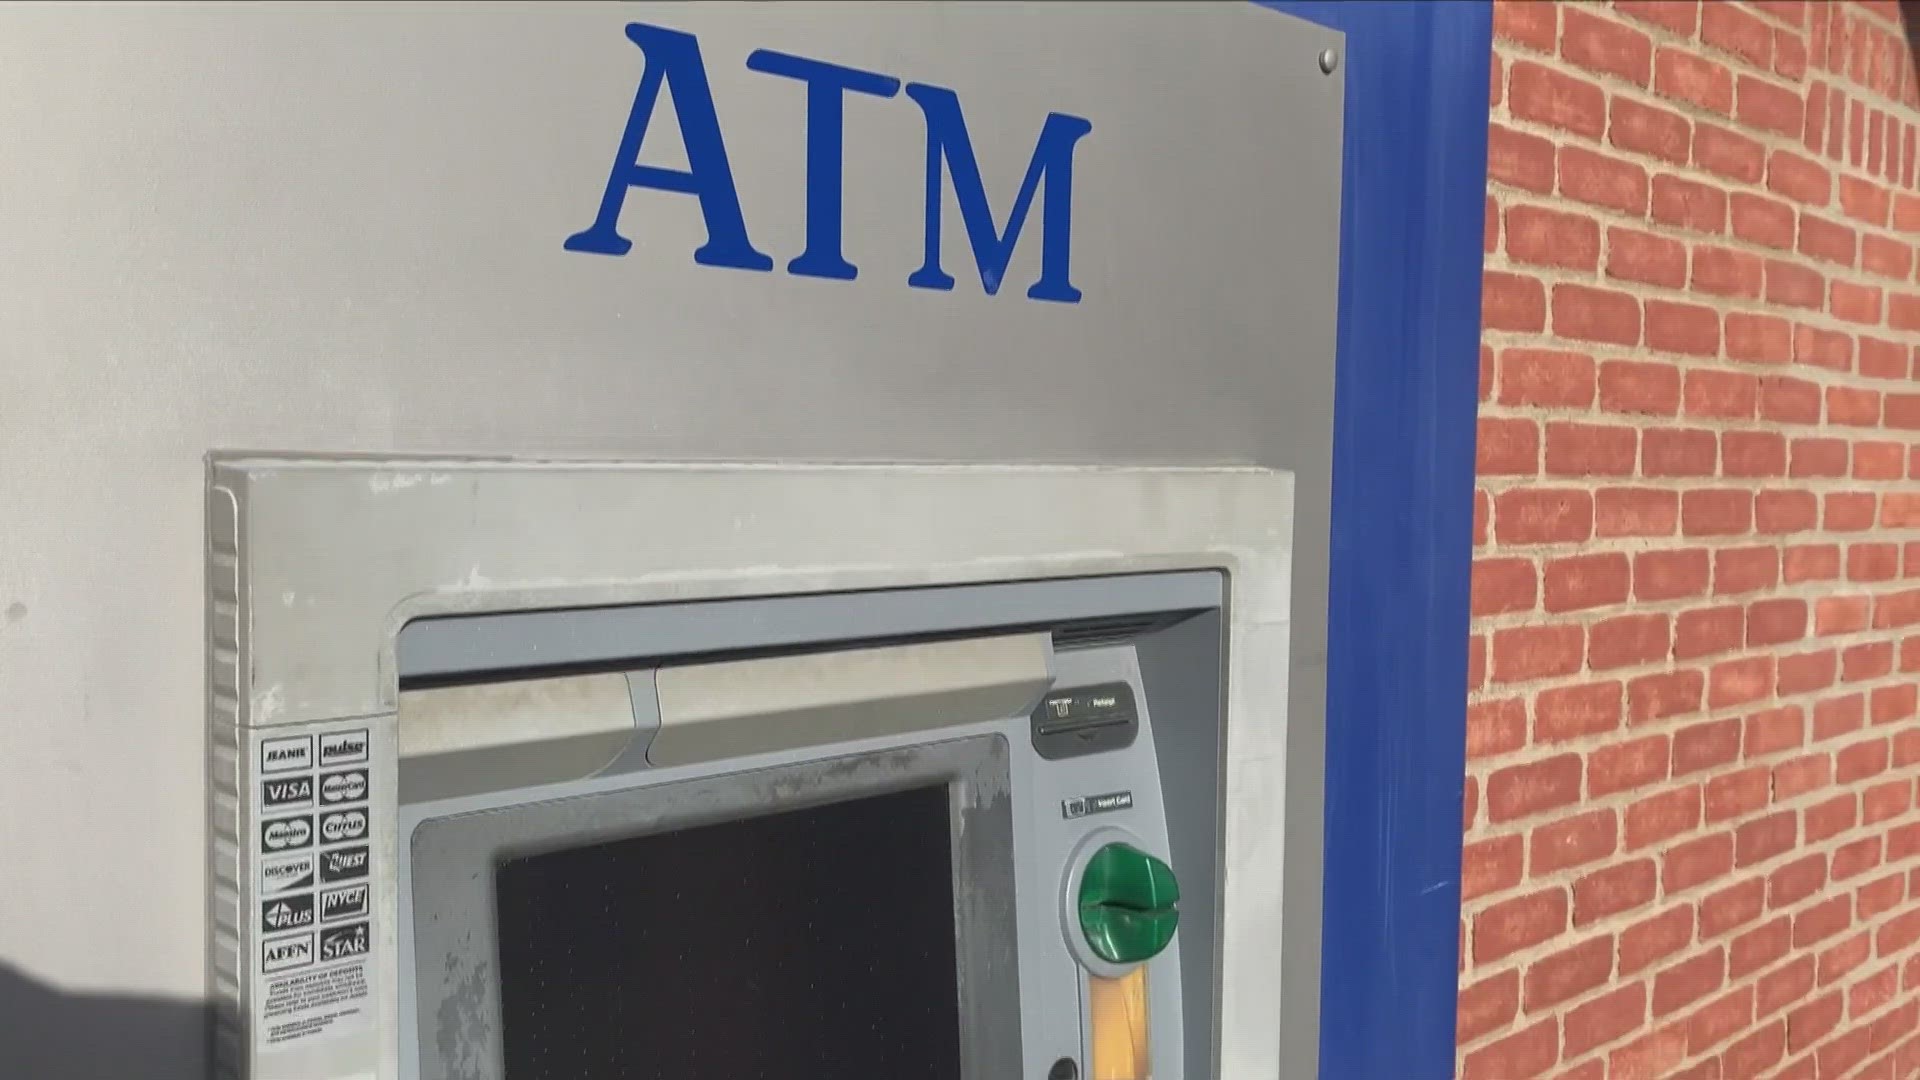 A new scam surrounding the atm is popping up on the west coast. Now, there is a warning from the better business bureau to be aware of it in central Ohio.